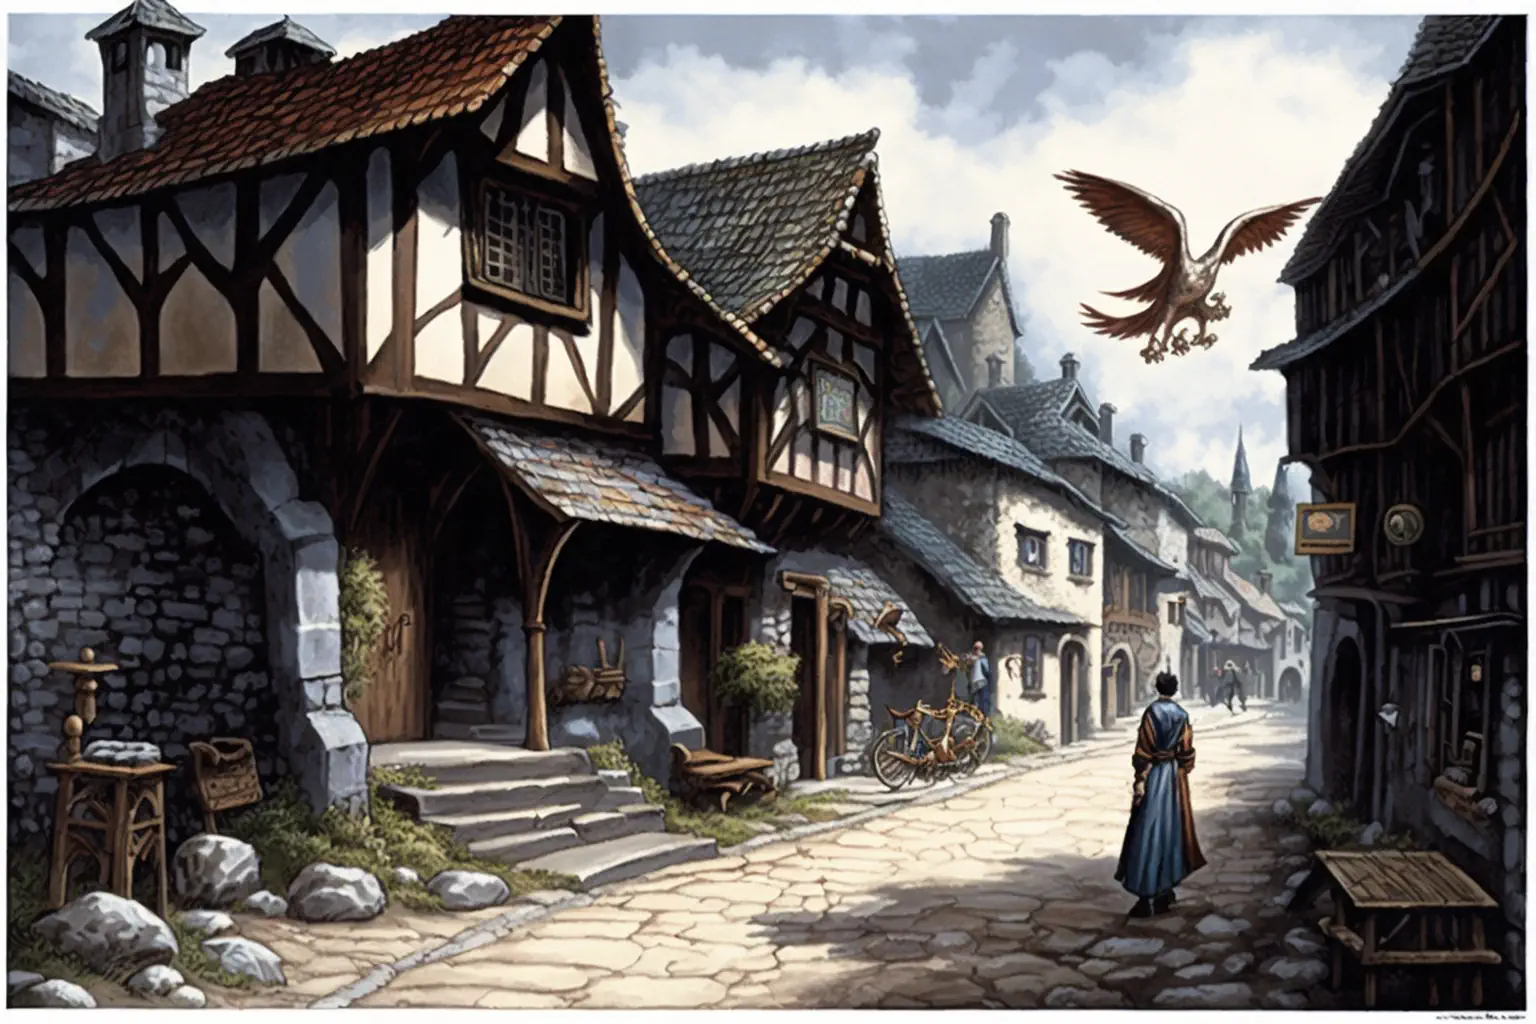 2Drak0nchik_medieval_village_with_several_dragons_walking_in_th_c727fc38-12a1-49ed-82a6-009b07d525a7